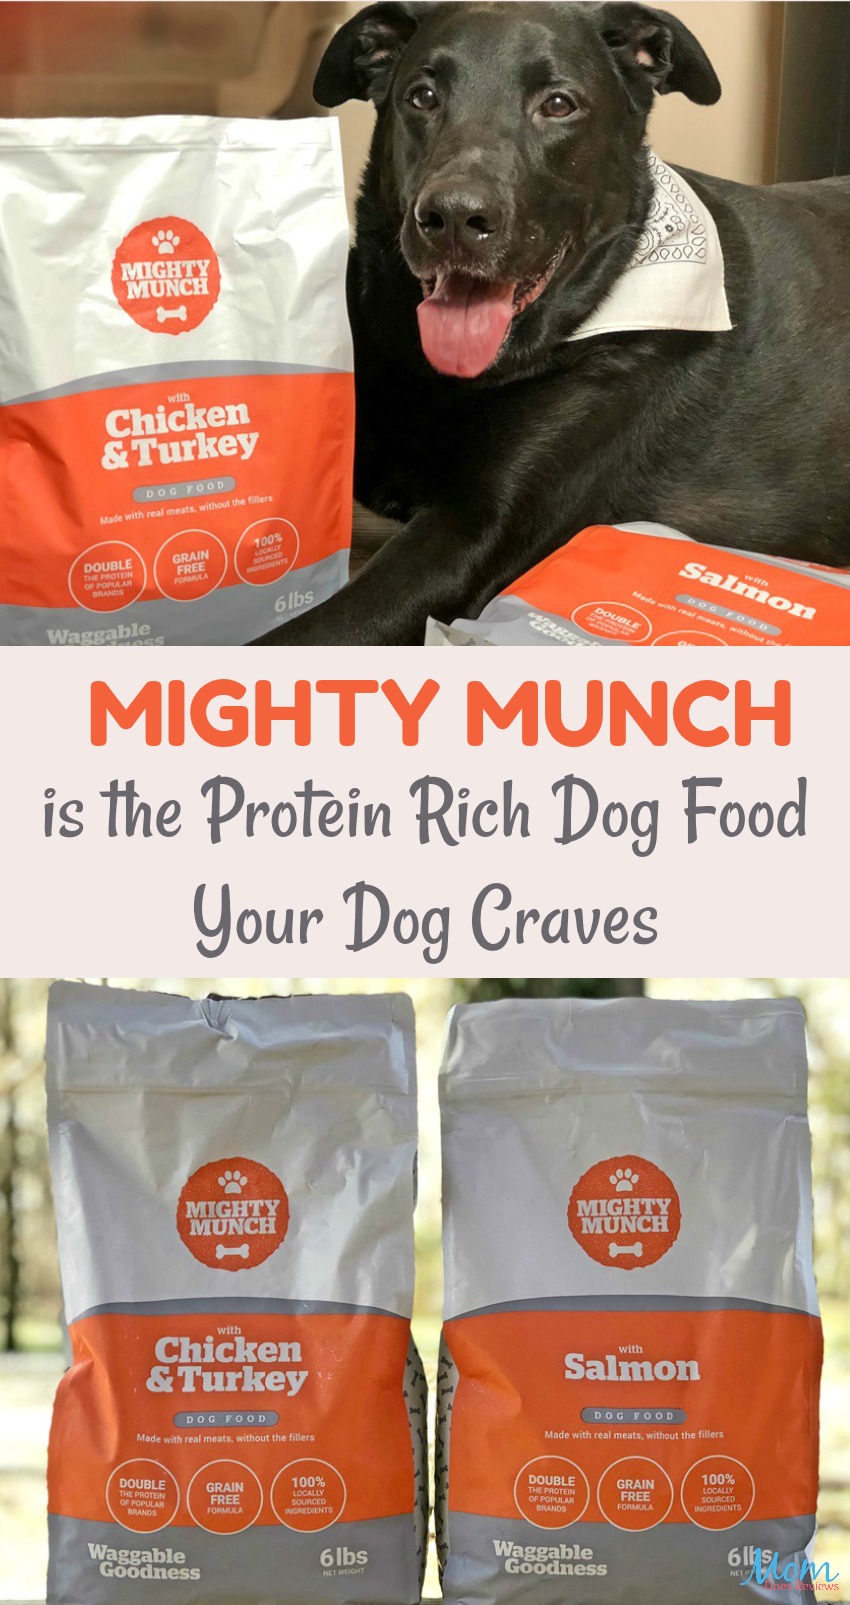 Mighty Munch is the Protein Rich Dog Food Your Dog Craves